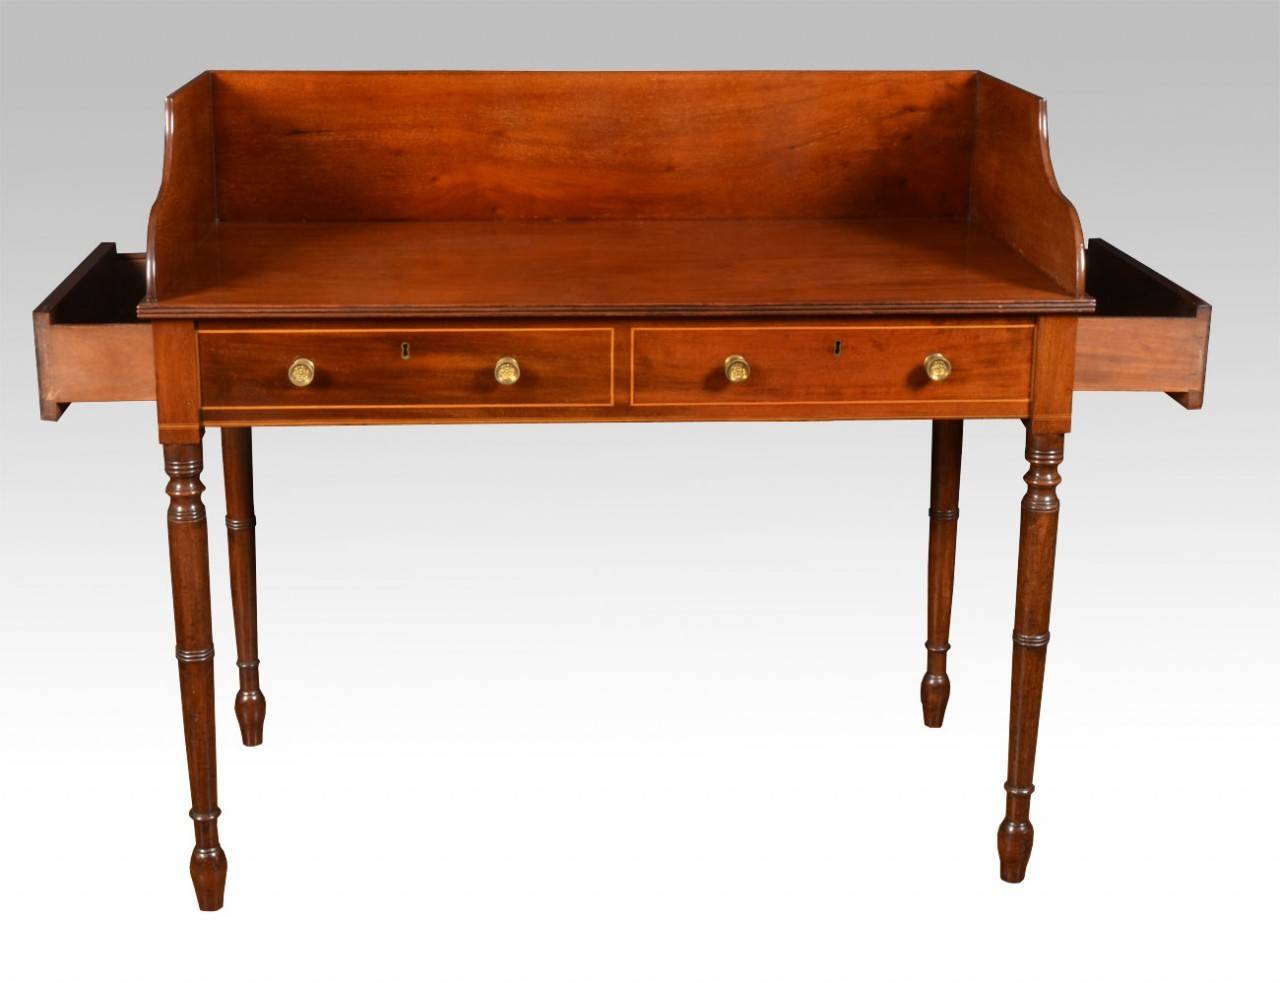 Regency mahogany wash stand, in the manner of Gillows with raised three quarter gallery to the large rectangular mahogany top, above two false drawers having single draw to either end, all raised up on finley fluted ring-turned